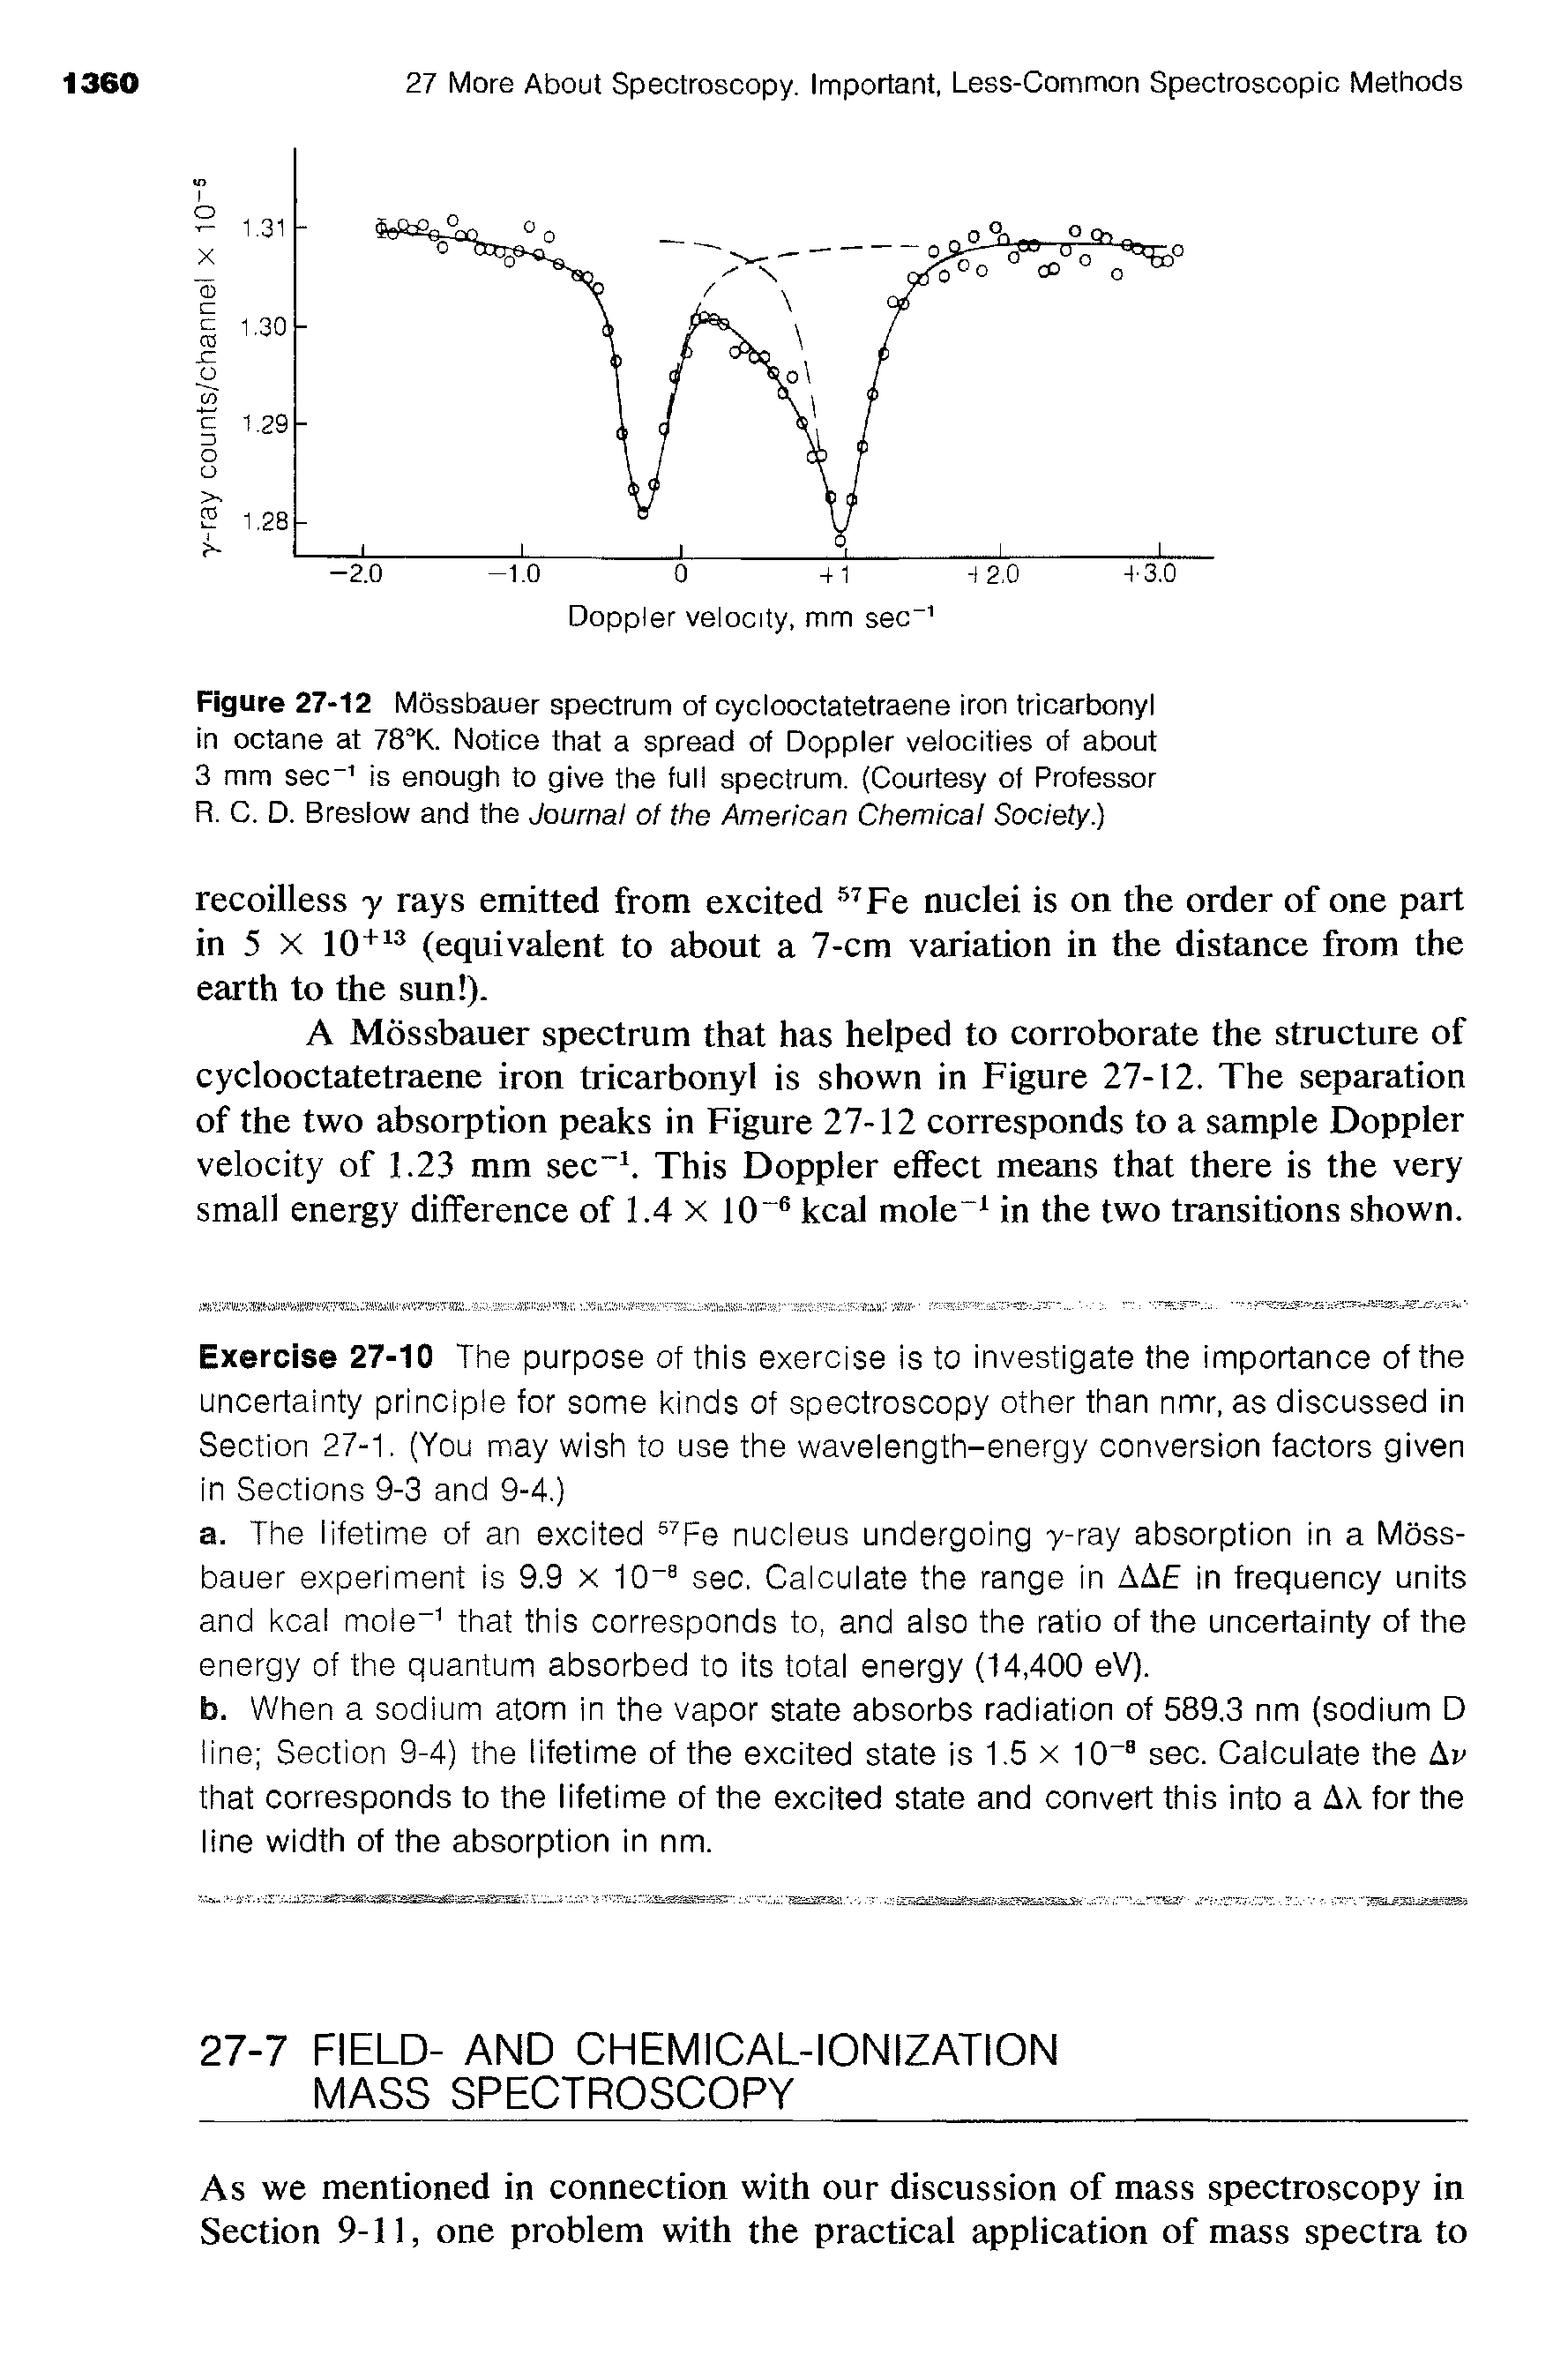 Figure 27-12 Mossbauer spectrum of cyclooctatetraene iron tricarbonyl in octane at 78°K. Notice that a spread of Doppler velocities of about 3 mm sec-1 is enough to give the full spectrum. (Courtesy of Professor R. C. D. Breslow and the Journal of the American Chemical Society.)...